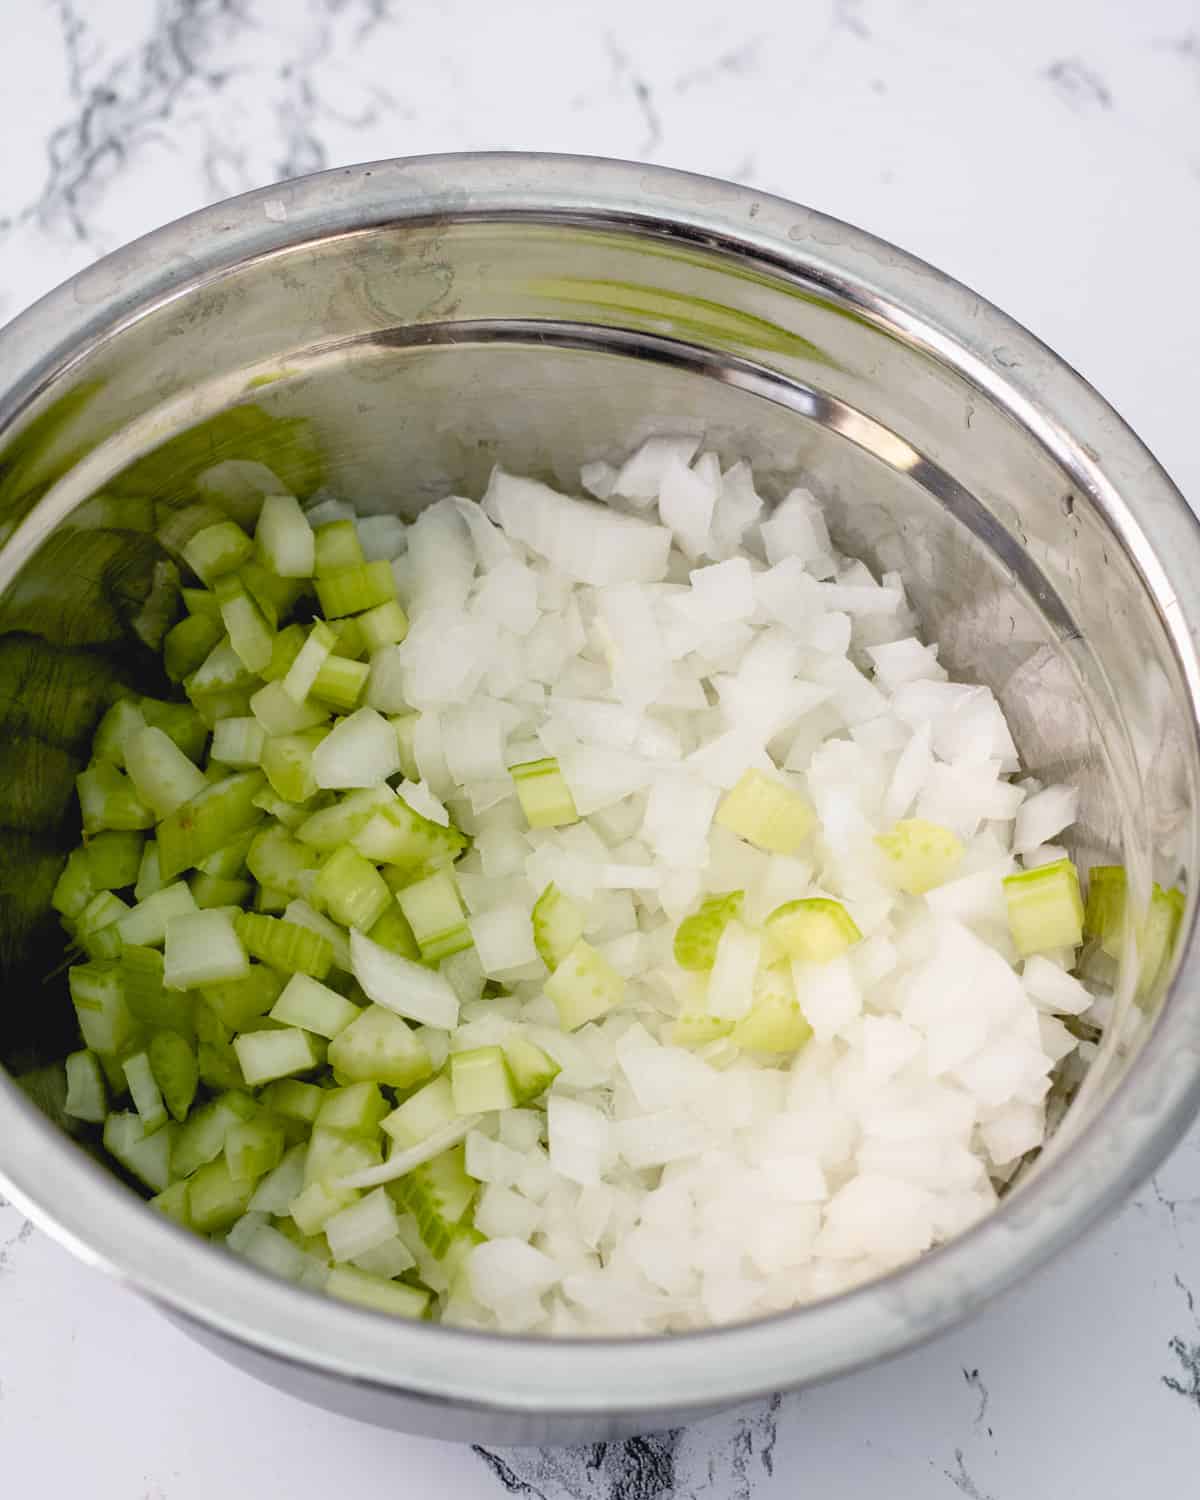 Chopped onions and celery in a stainless bowl.